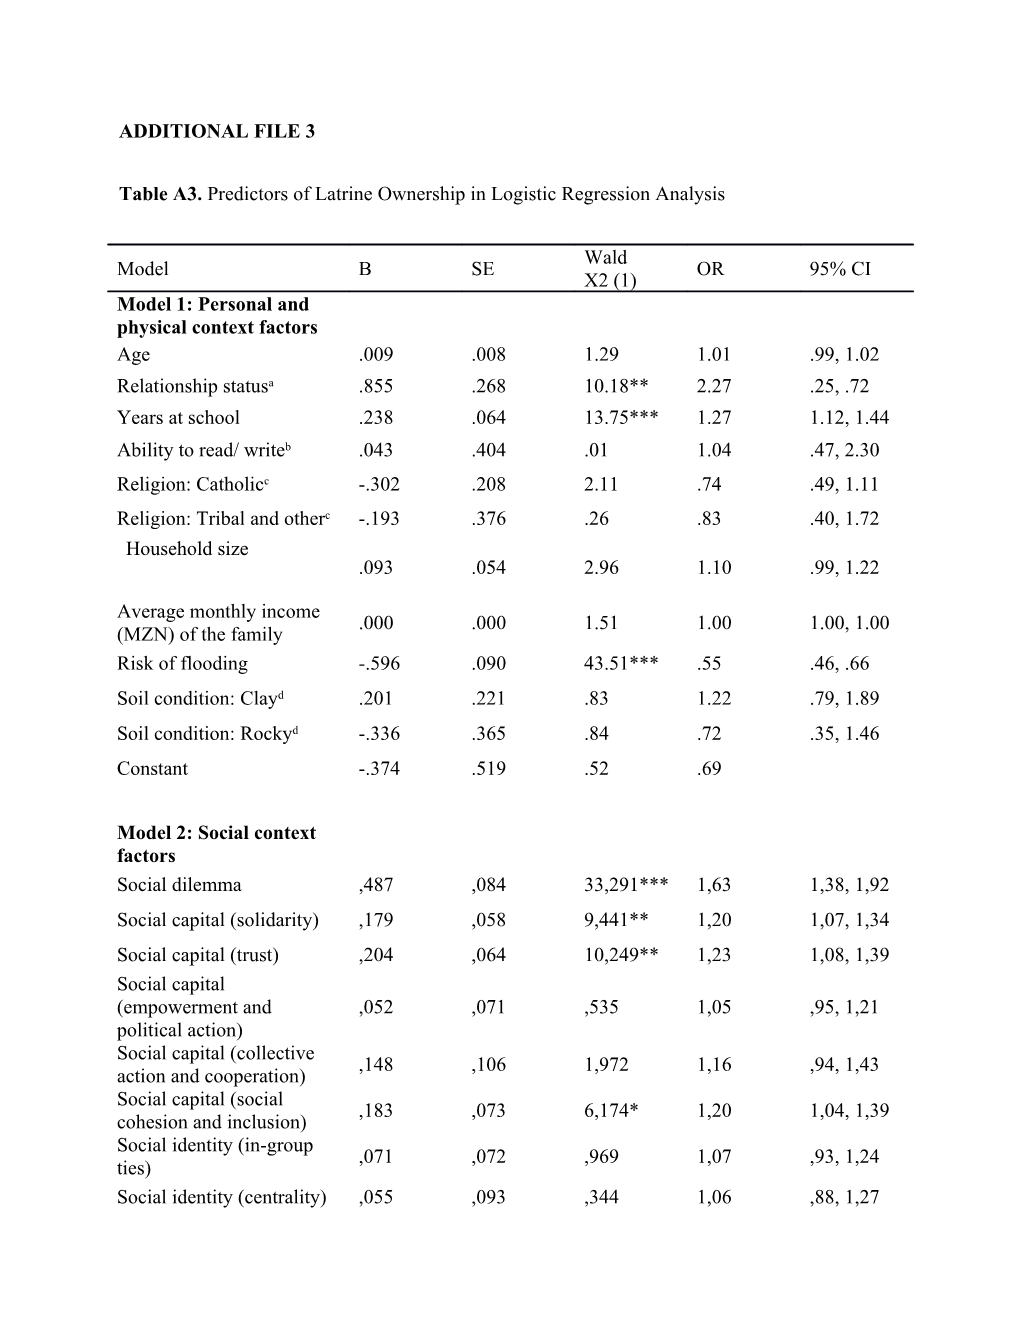 Table A3.Predictors of Latrine Ownership in Logistic Regression Analysis